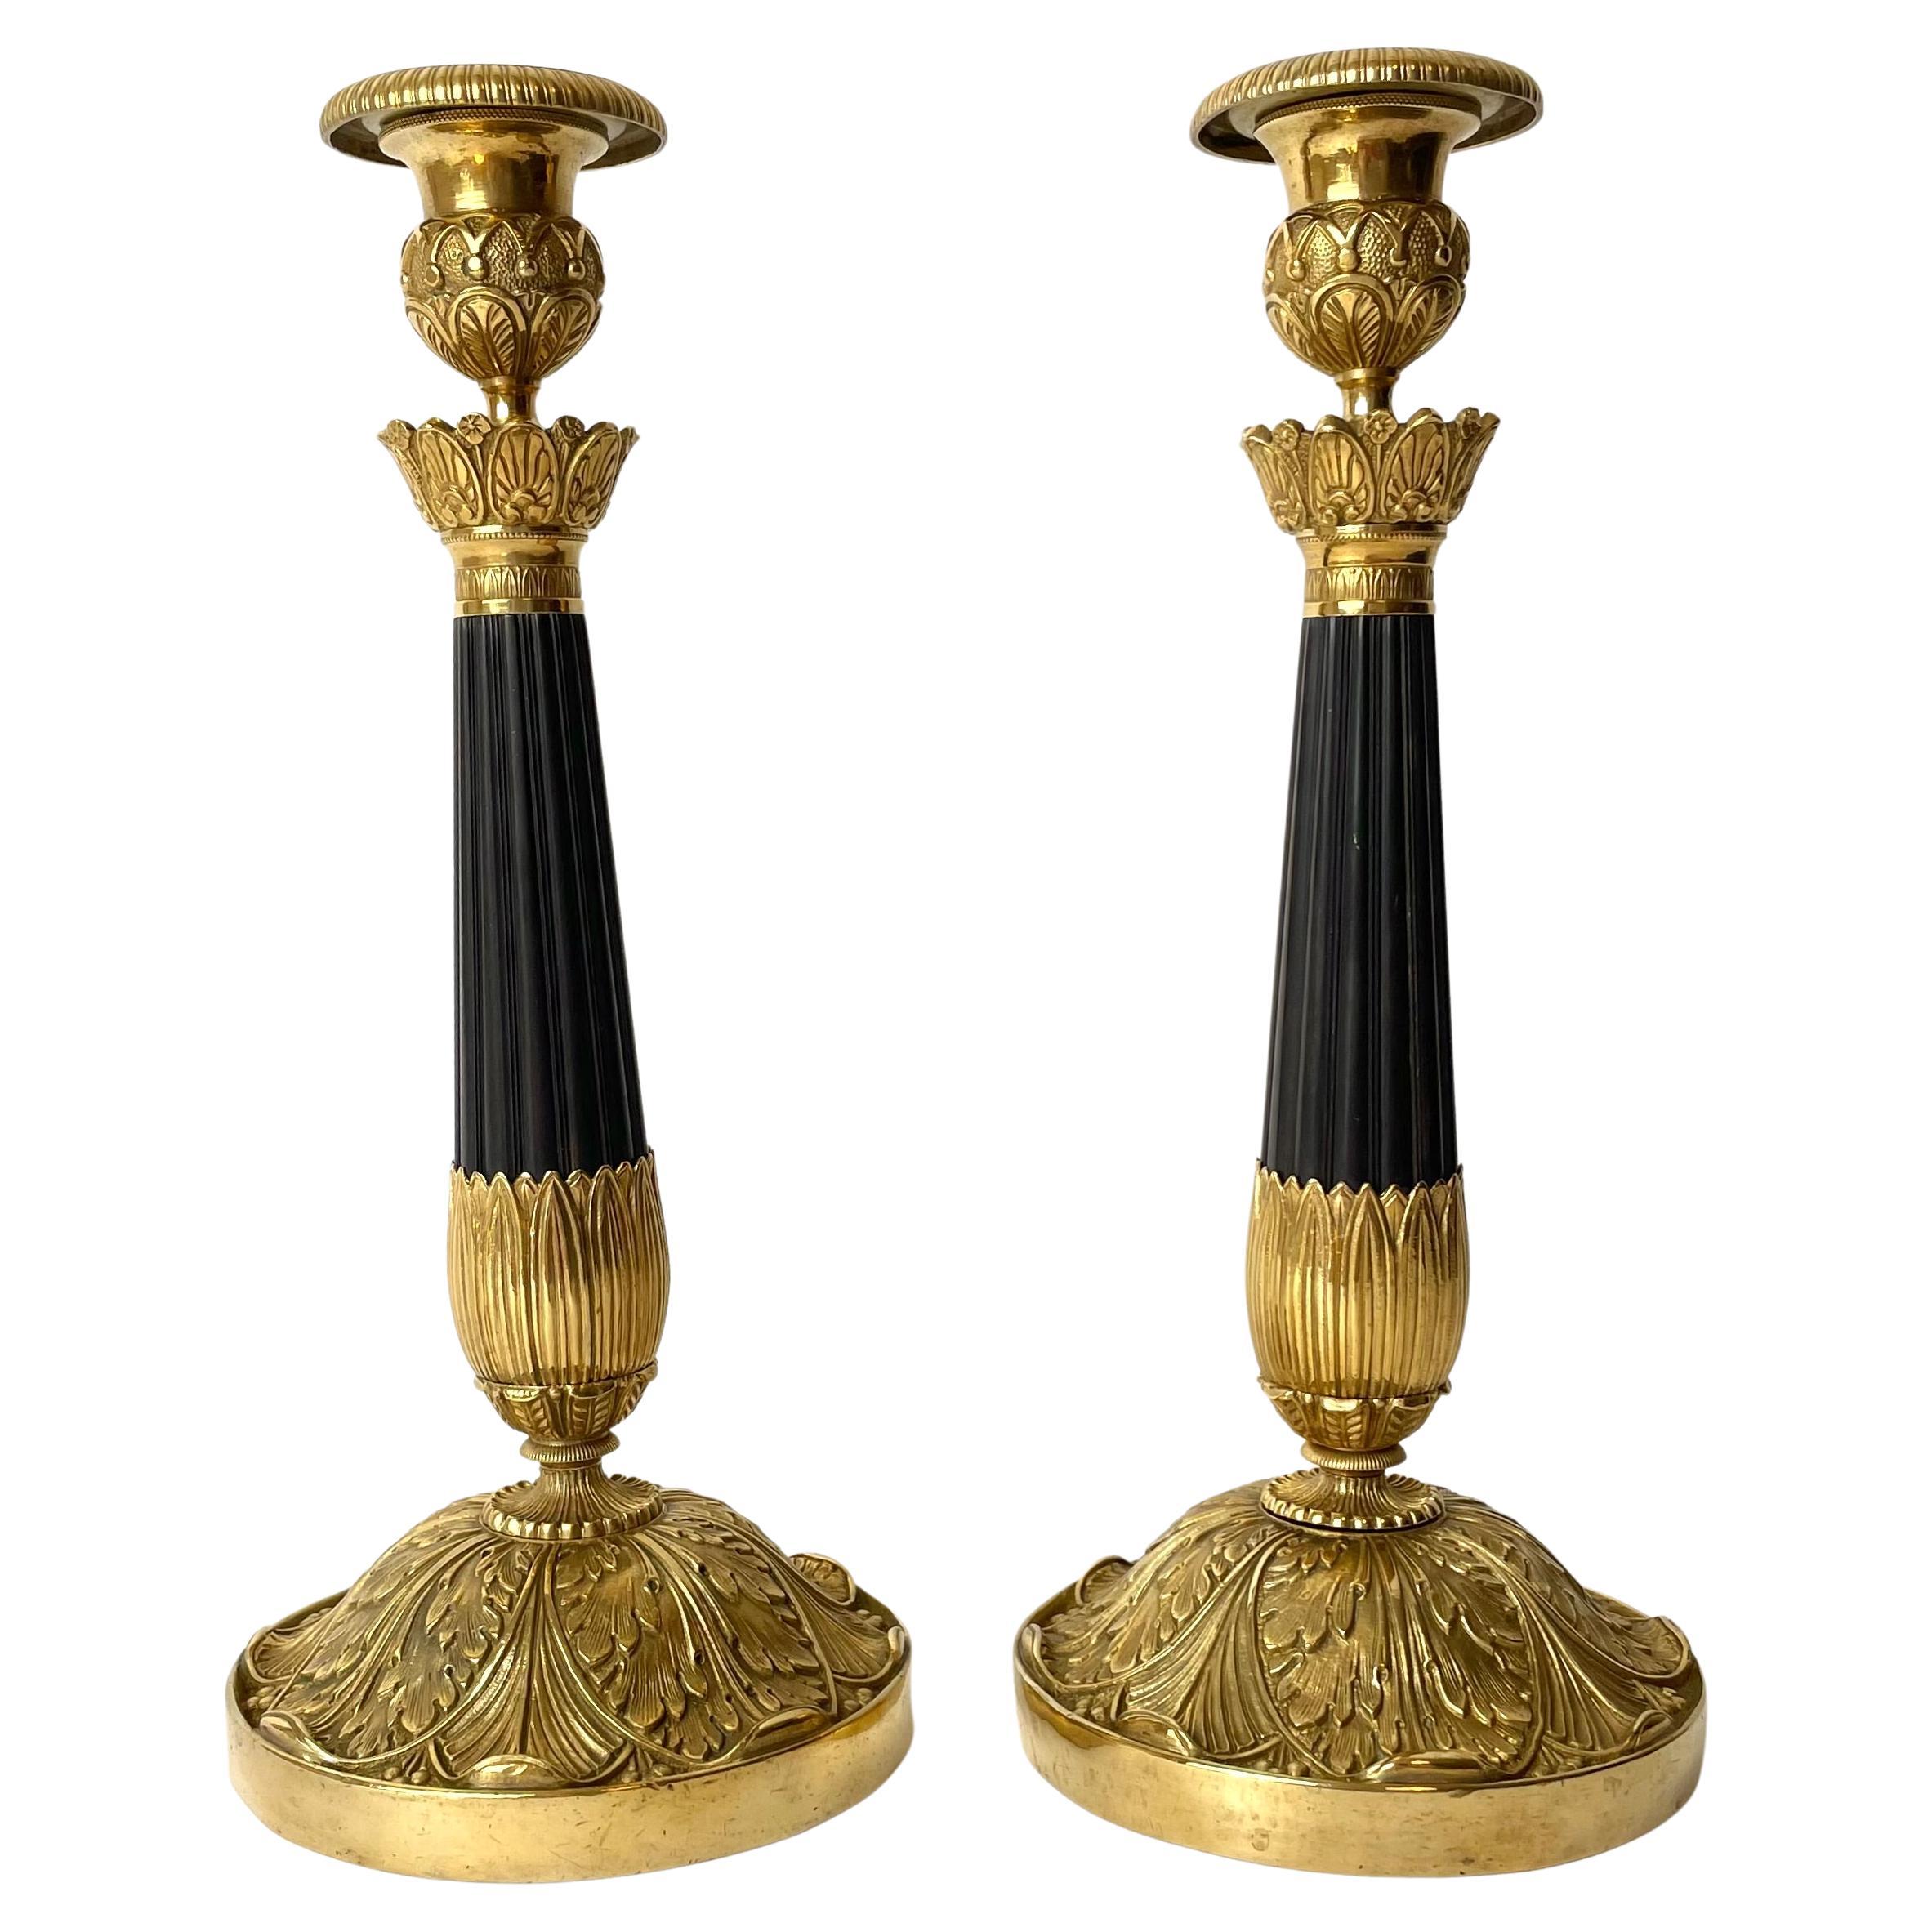 Pair of Empire Candlesticks, Gilded and Patinated Bronze, Early 19th Century For Sale